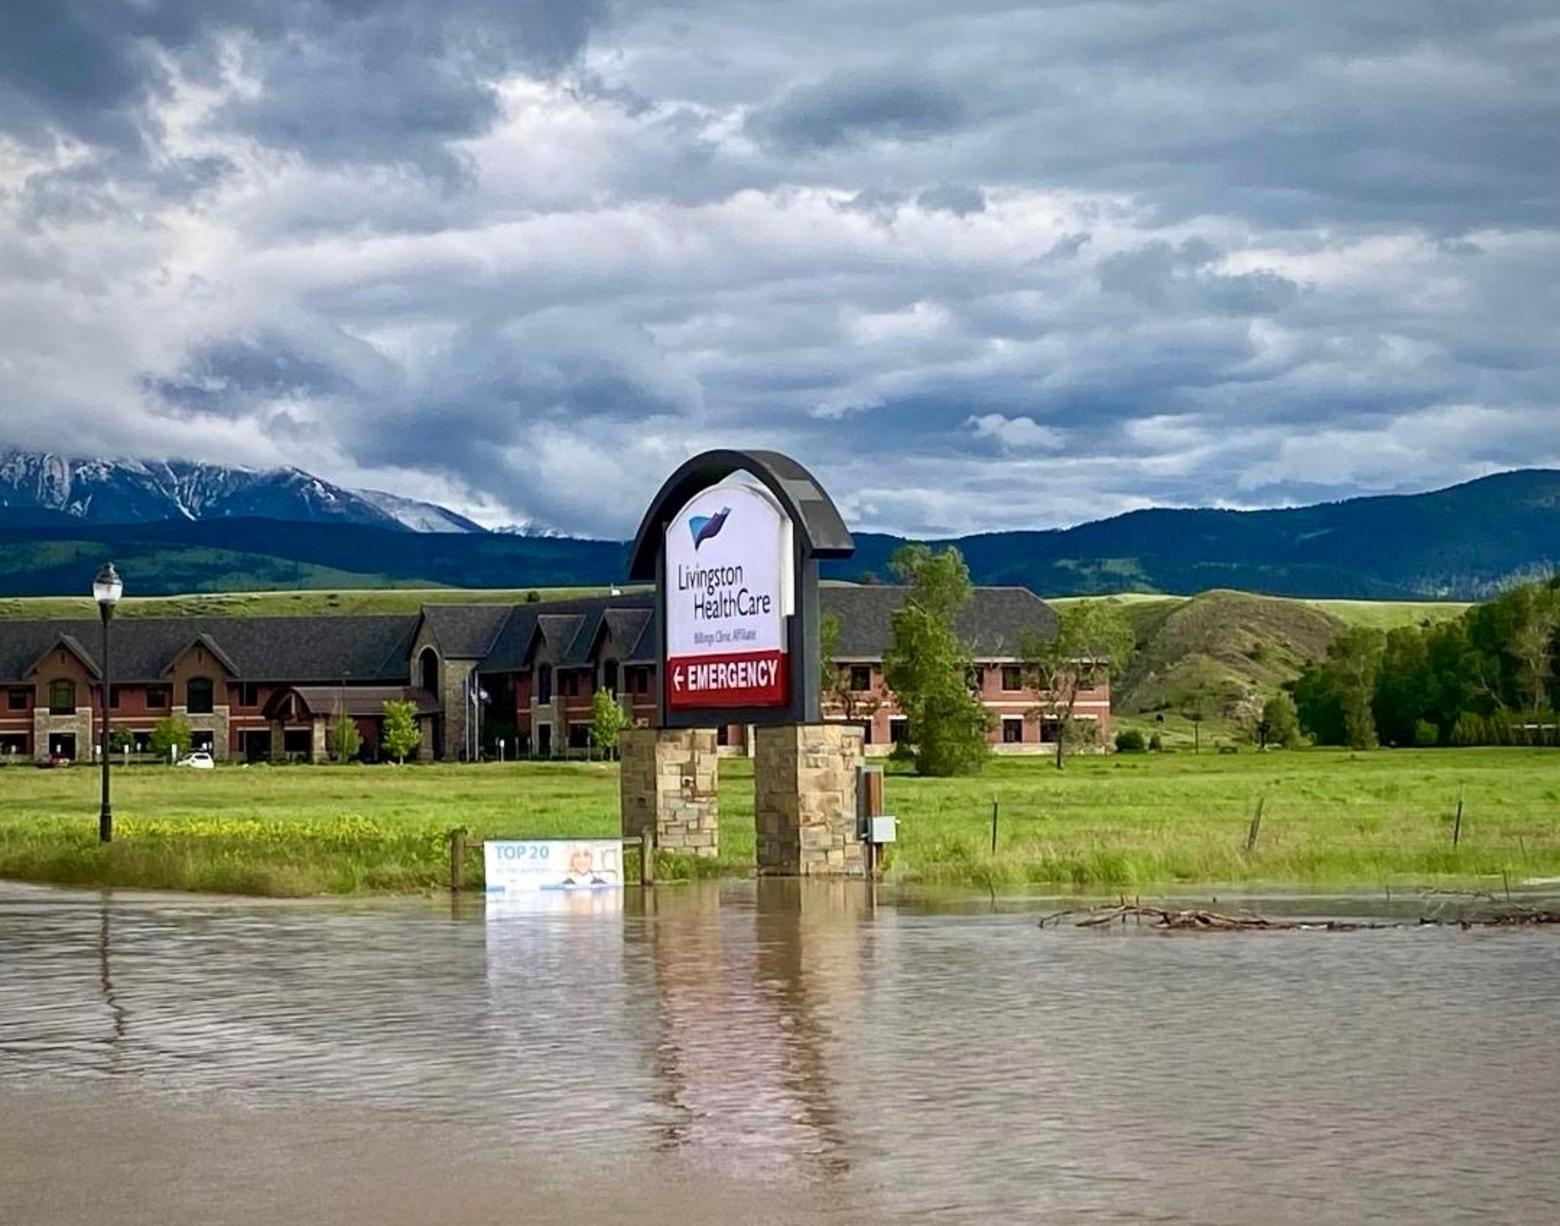 The recently-built new Livingston Hospital is the pride and joy of the community. Constructed near the Yellowstone River, it was surrounded by floodwaters, driven by torrential rain and melting snowpack, in June 2022. Some nearby buildings suffered water damage.